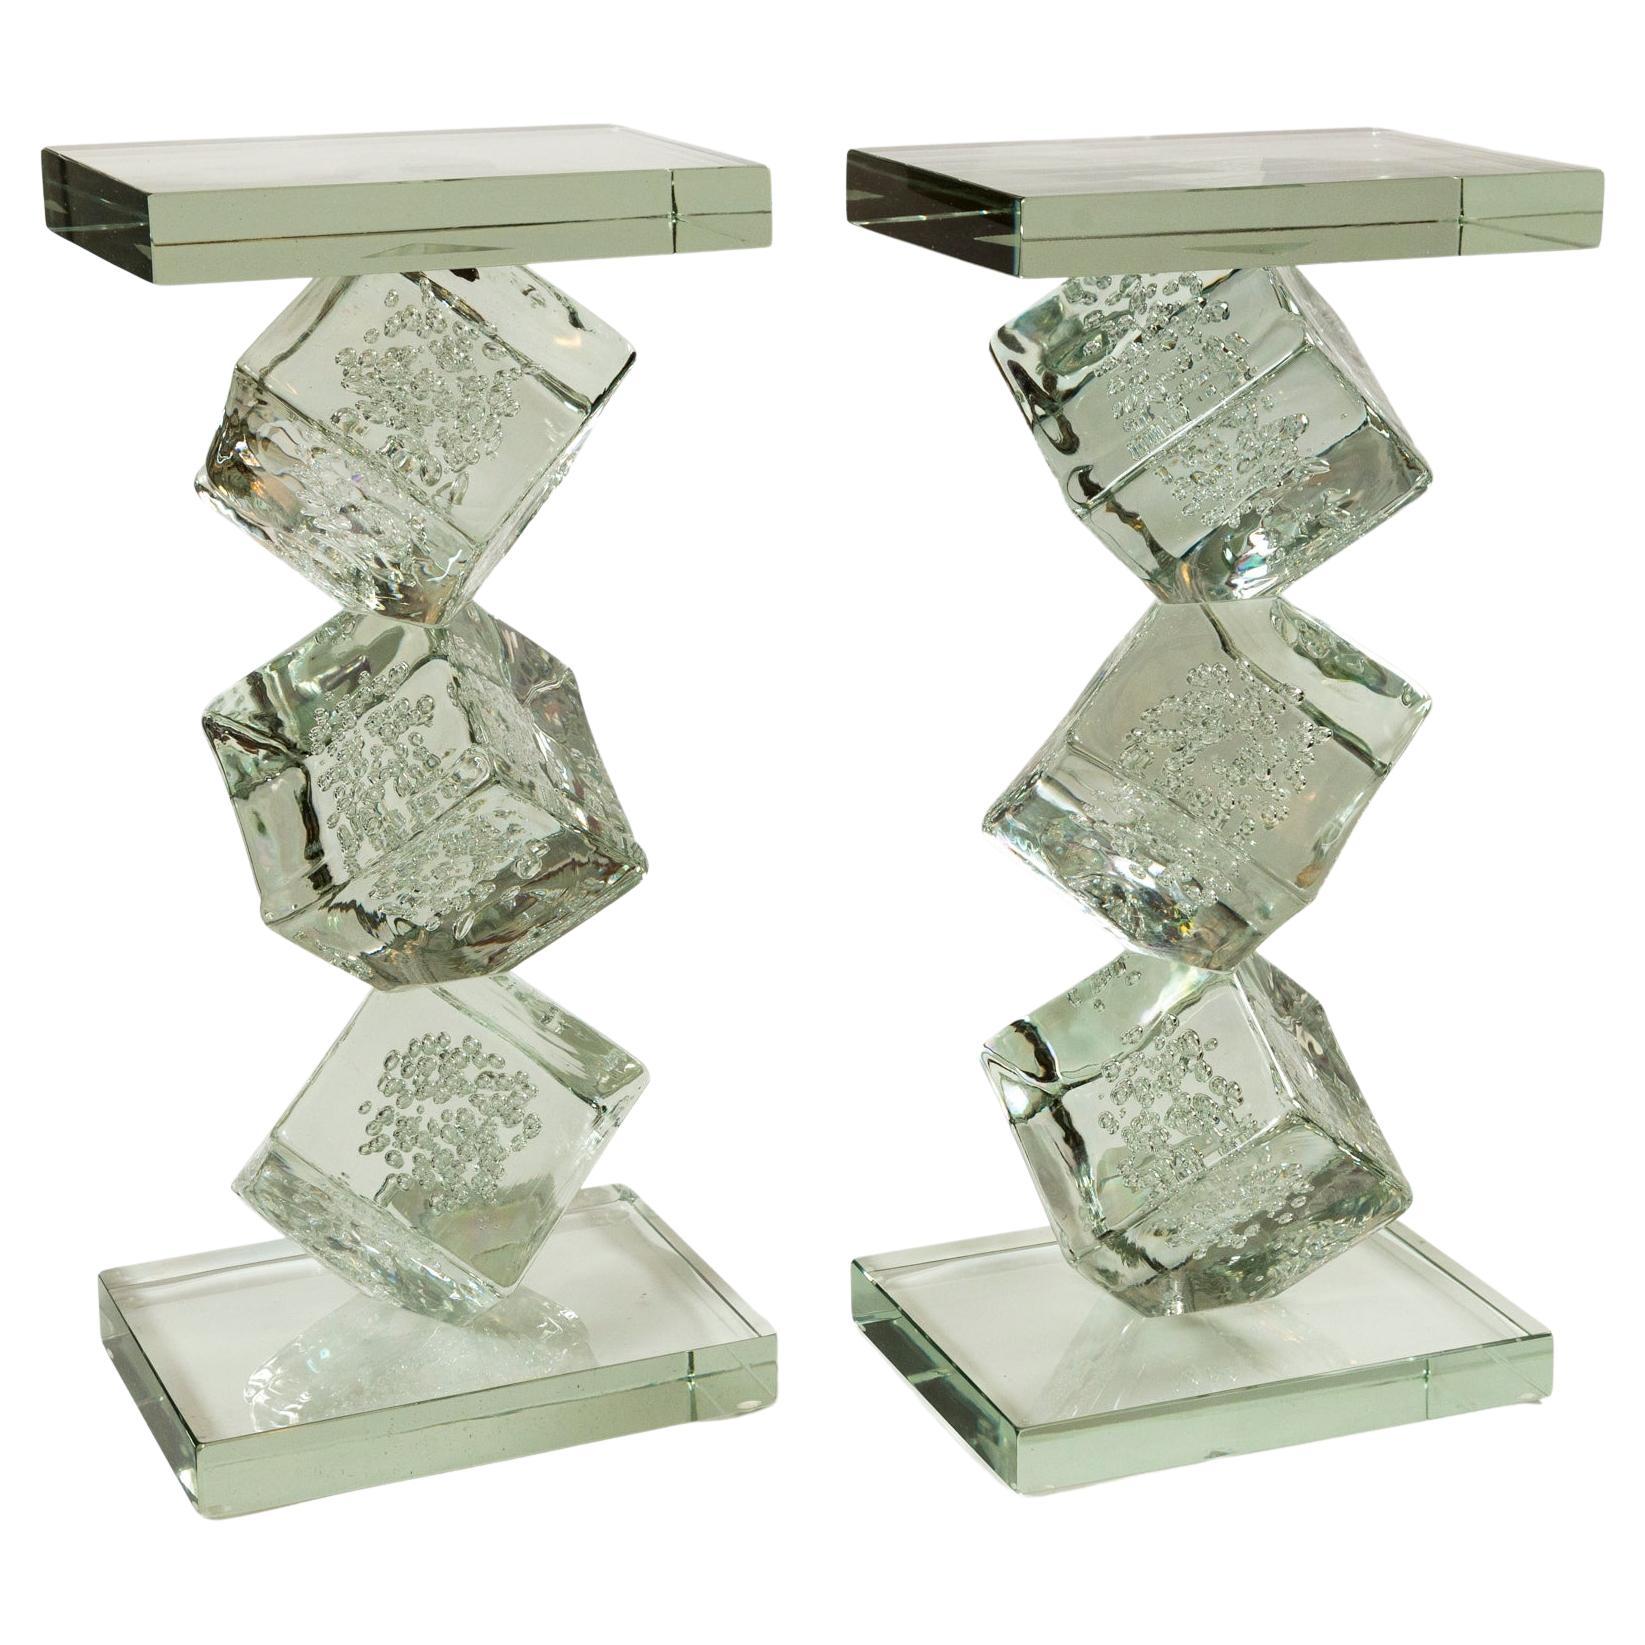 Whimsical and beautifuly executed end table composed of 3 large blown clear cube-shaped glass sculptures with floating bubbles which are then  irregulary  stacked upon one another and finished with a 1.6 inch thick rectangular-shaped clear glass